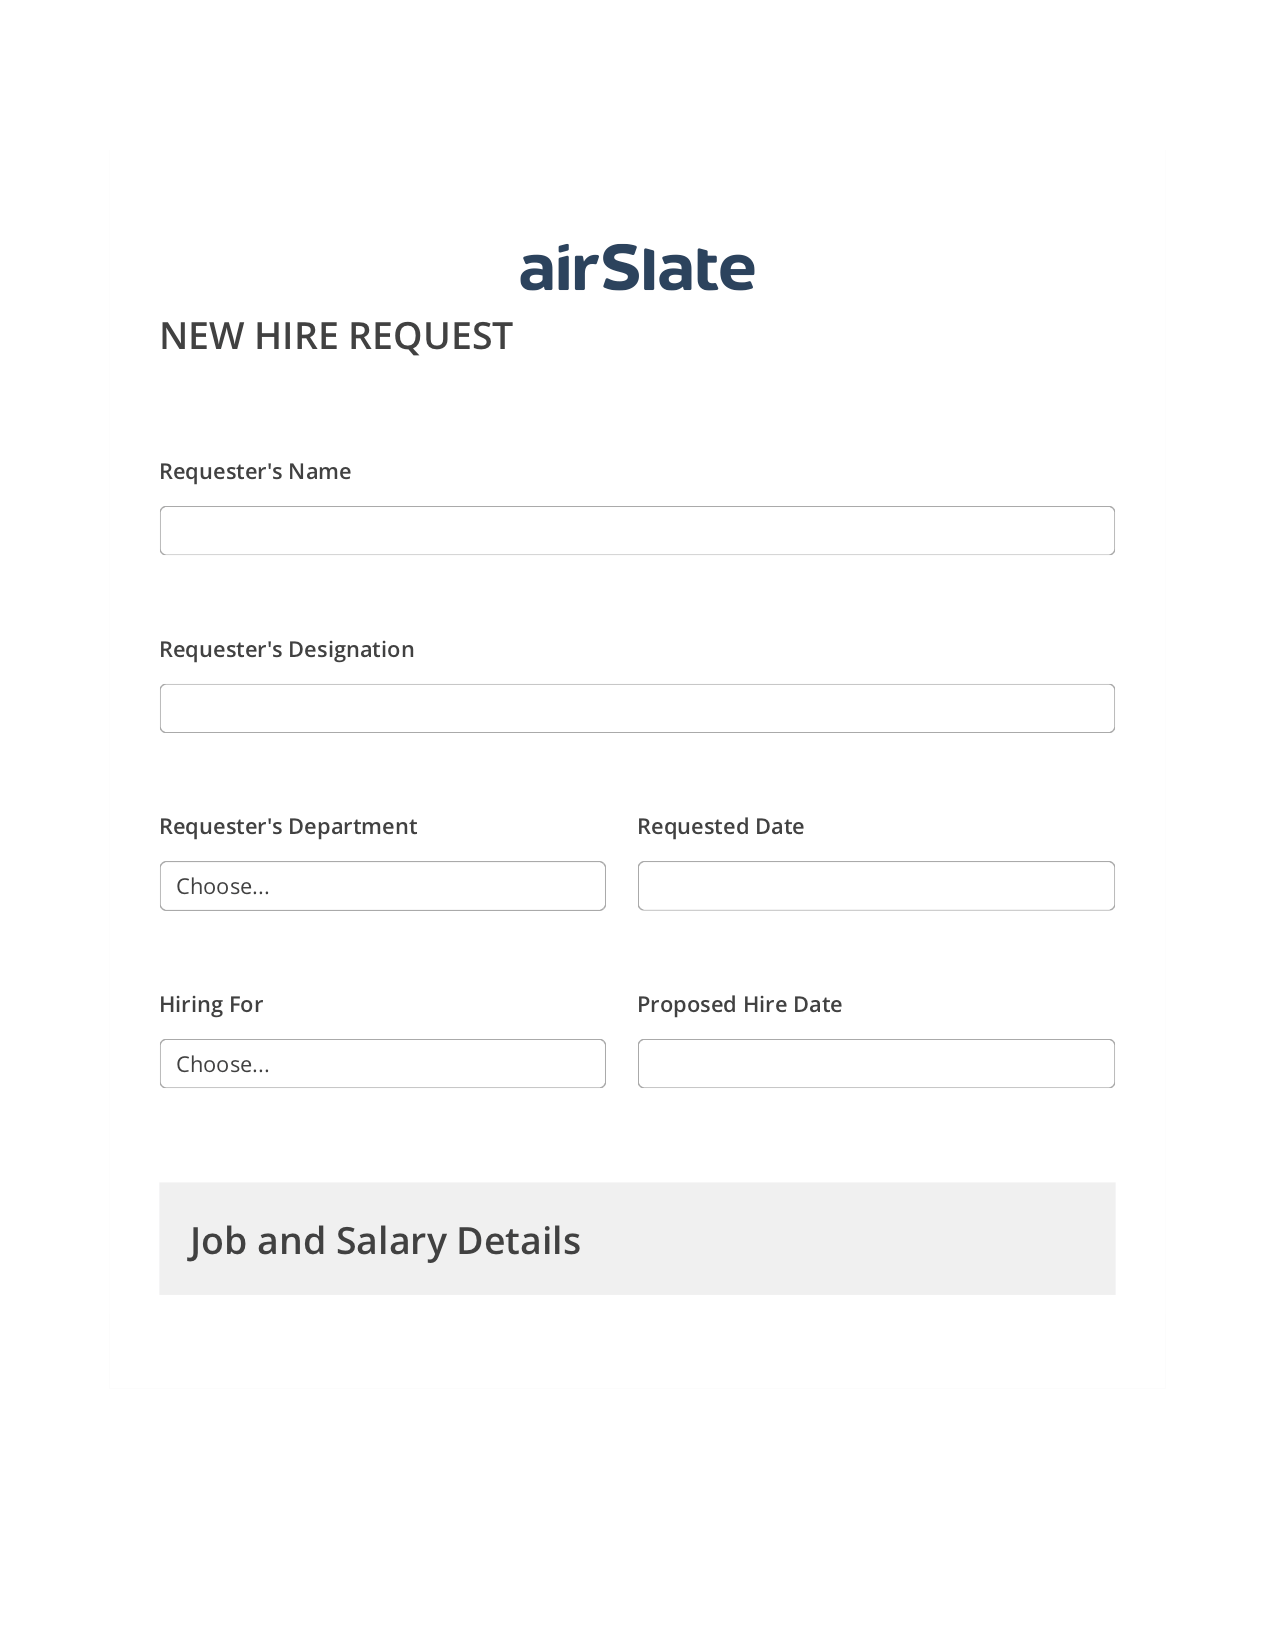 Multirole Hiring Request Workflow Pre-fill from MS Dynamics 365 Records, Rename Slate Bot, Export to Excel 365 Bot